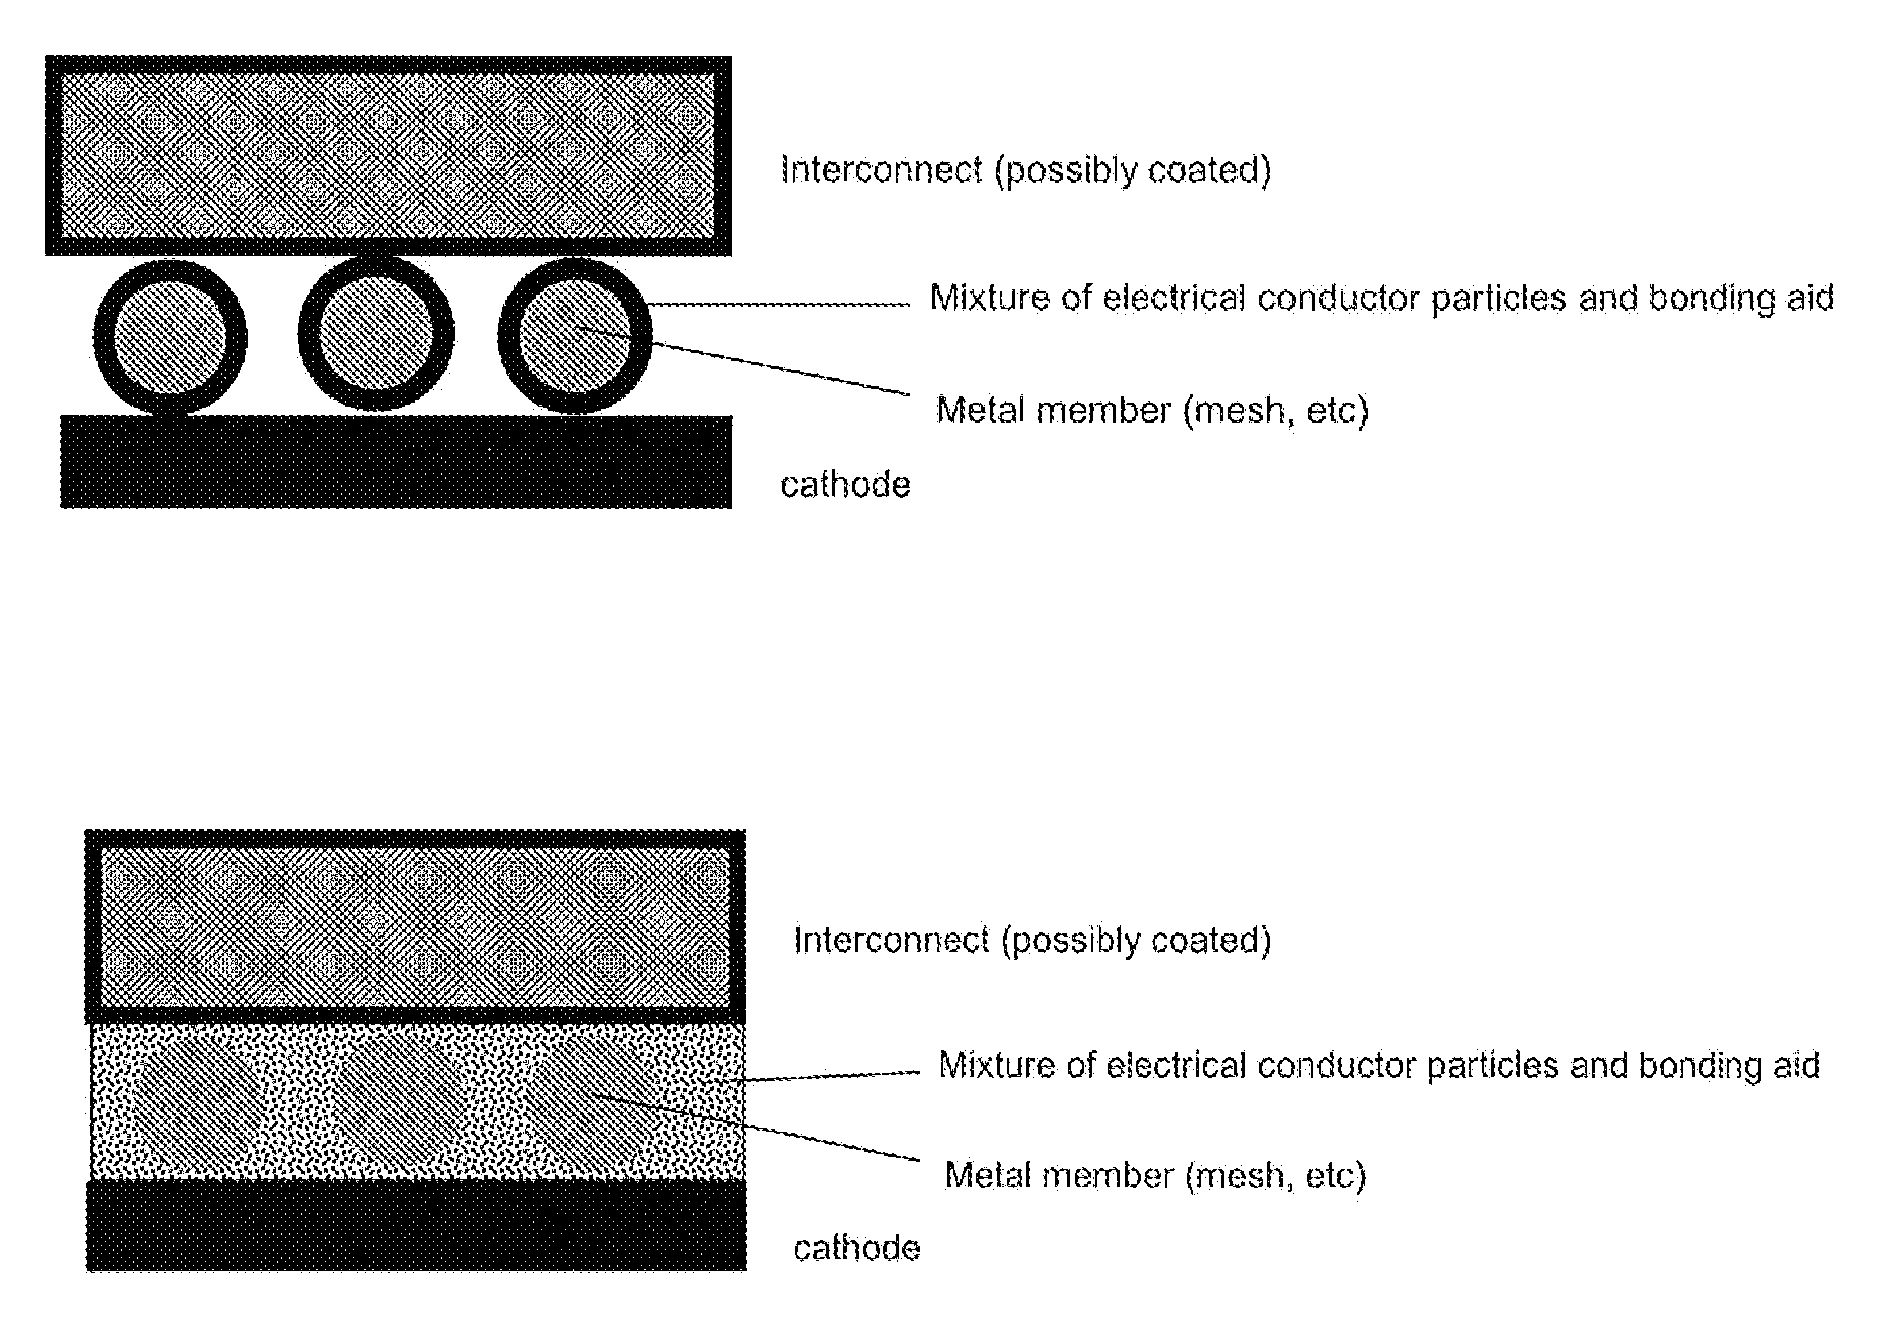 Electrical Contact Material in High-Temperature Electrochemical Devices